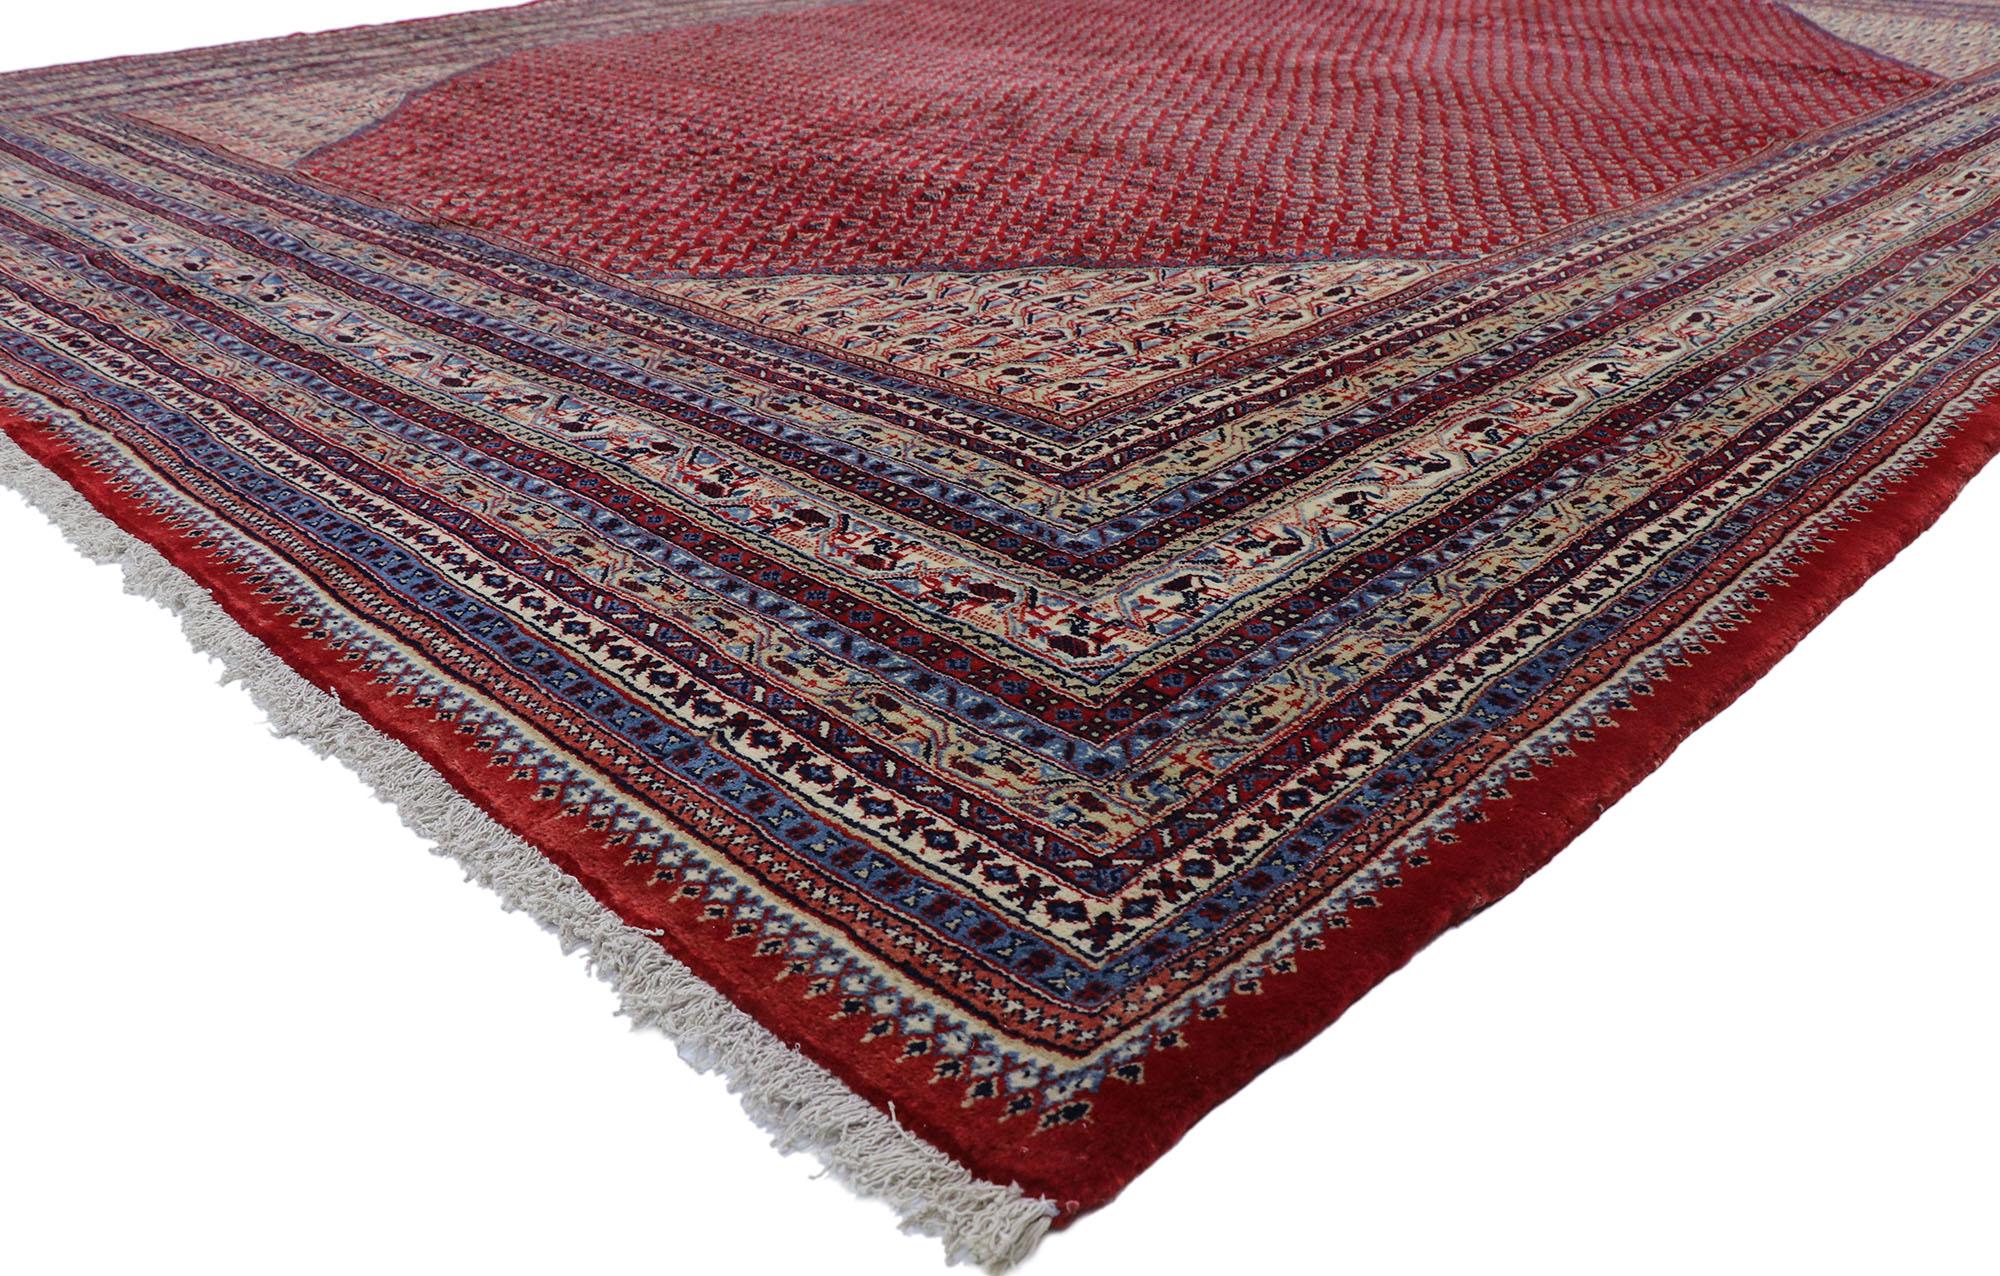 78064 Vintage Persian Sarouk Mir Boteh rug with Jacobean Style 11'05 x 15'11. With its striking appeal and saturated red color palette, this hand-knotted wool vintage Persian Sarouk Mir Boteh rug appears like a sumptuous Italian velvet, recalling